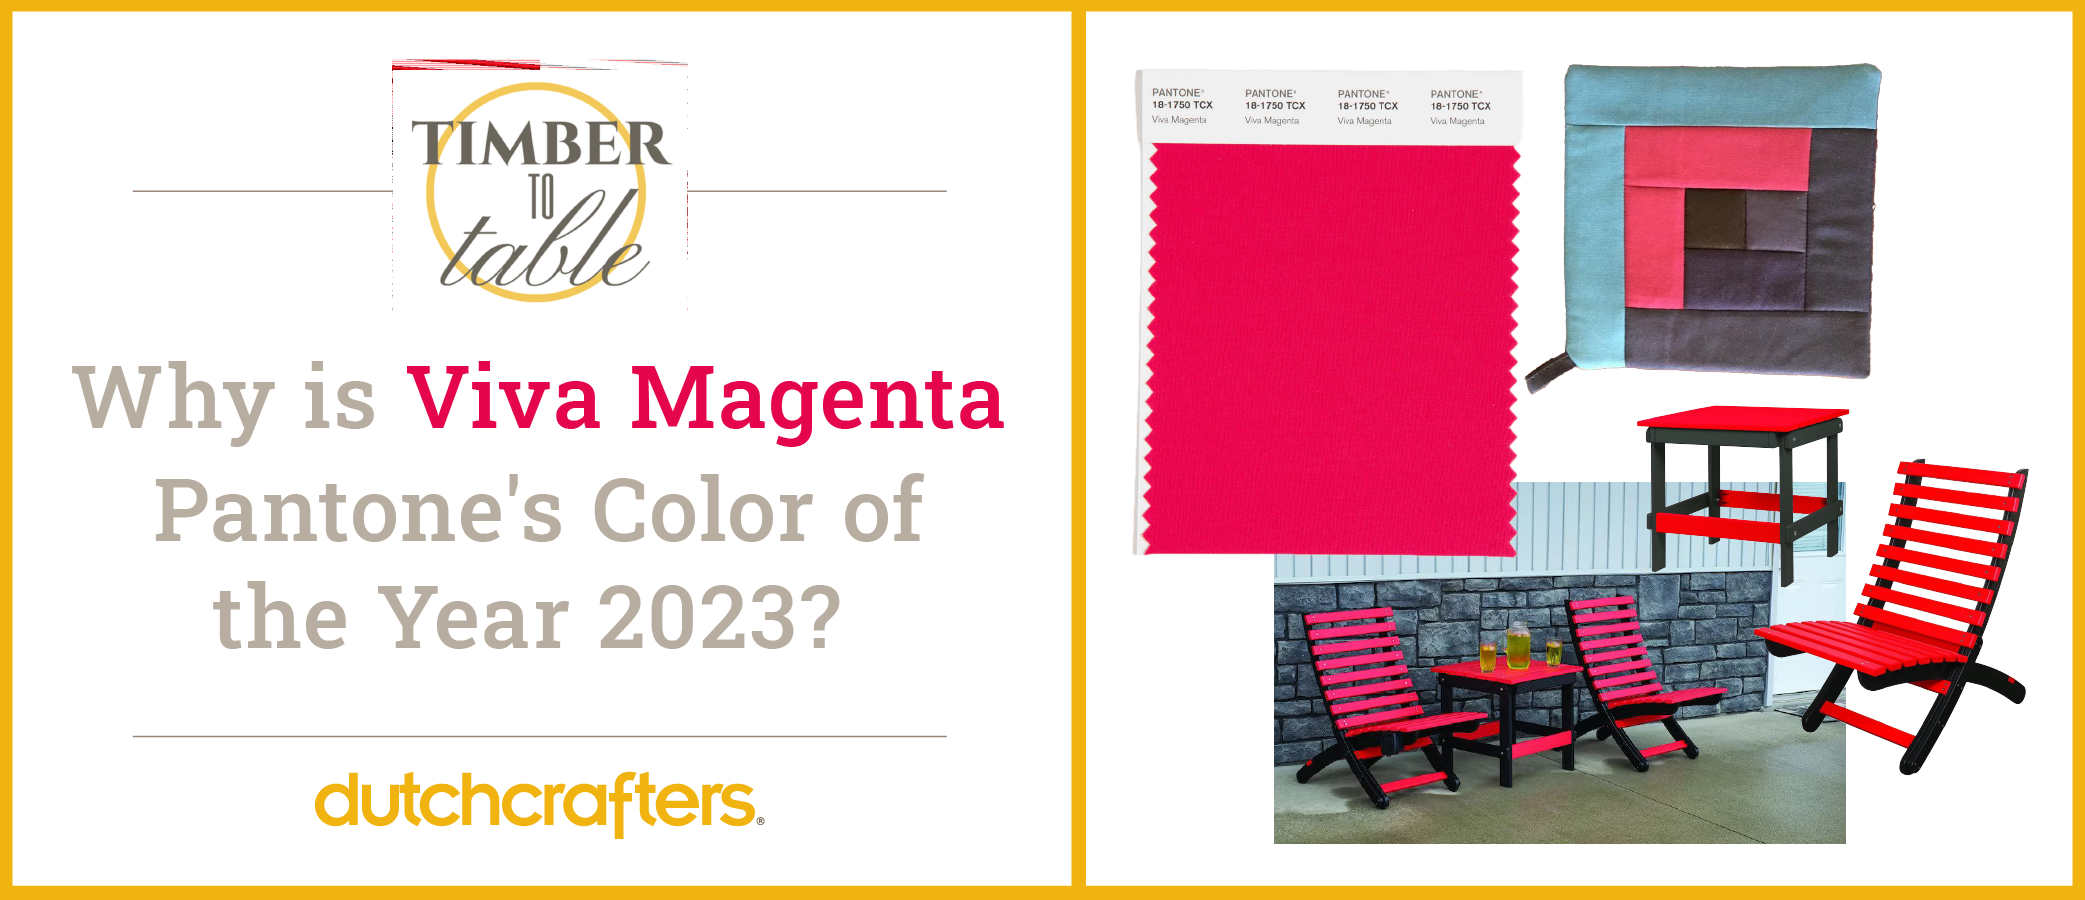 Why Is Viva Magenta Pantone's Color of the Year 2023? - TIMBER TO